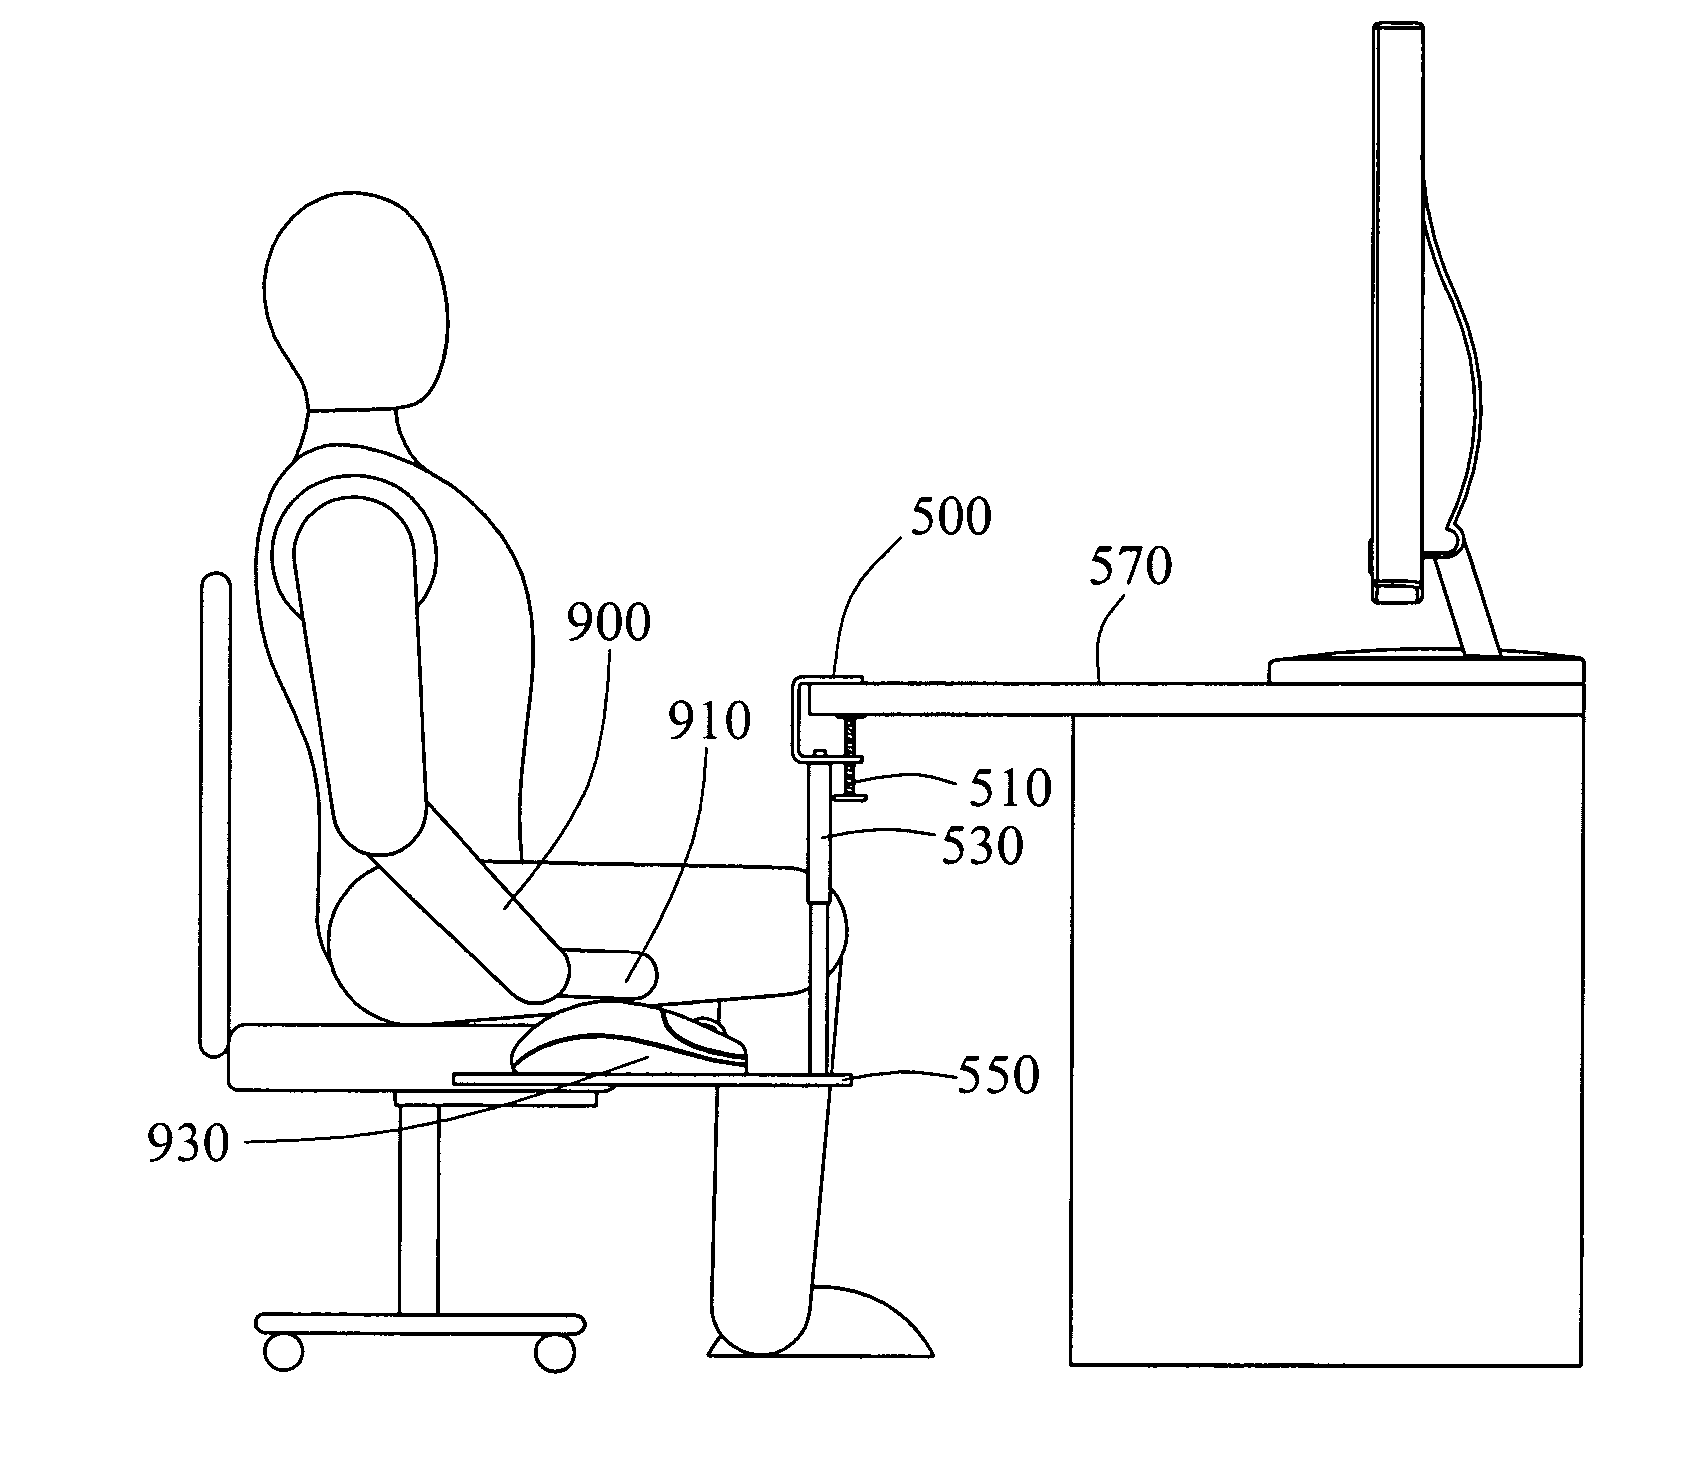 Furniture for placing electronic device